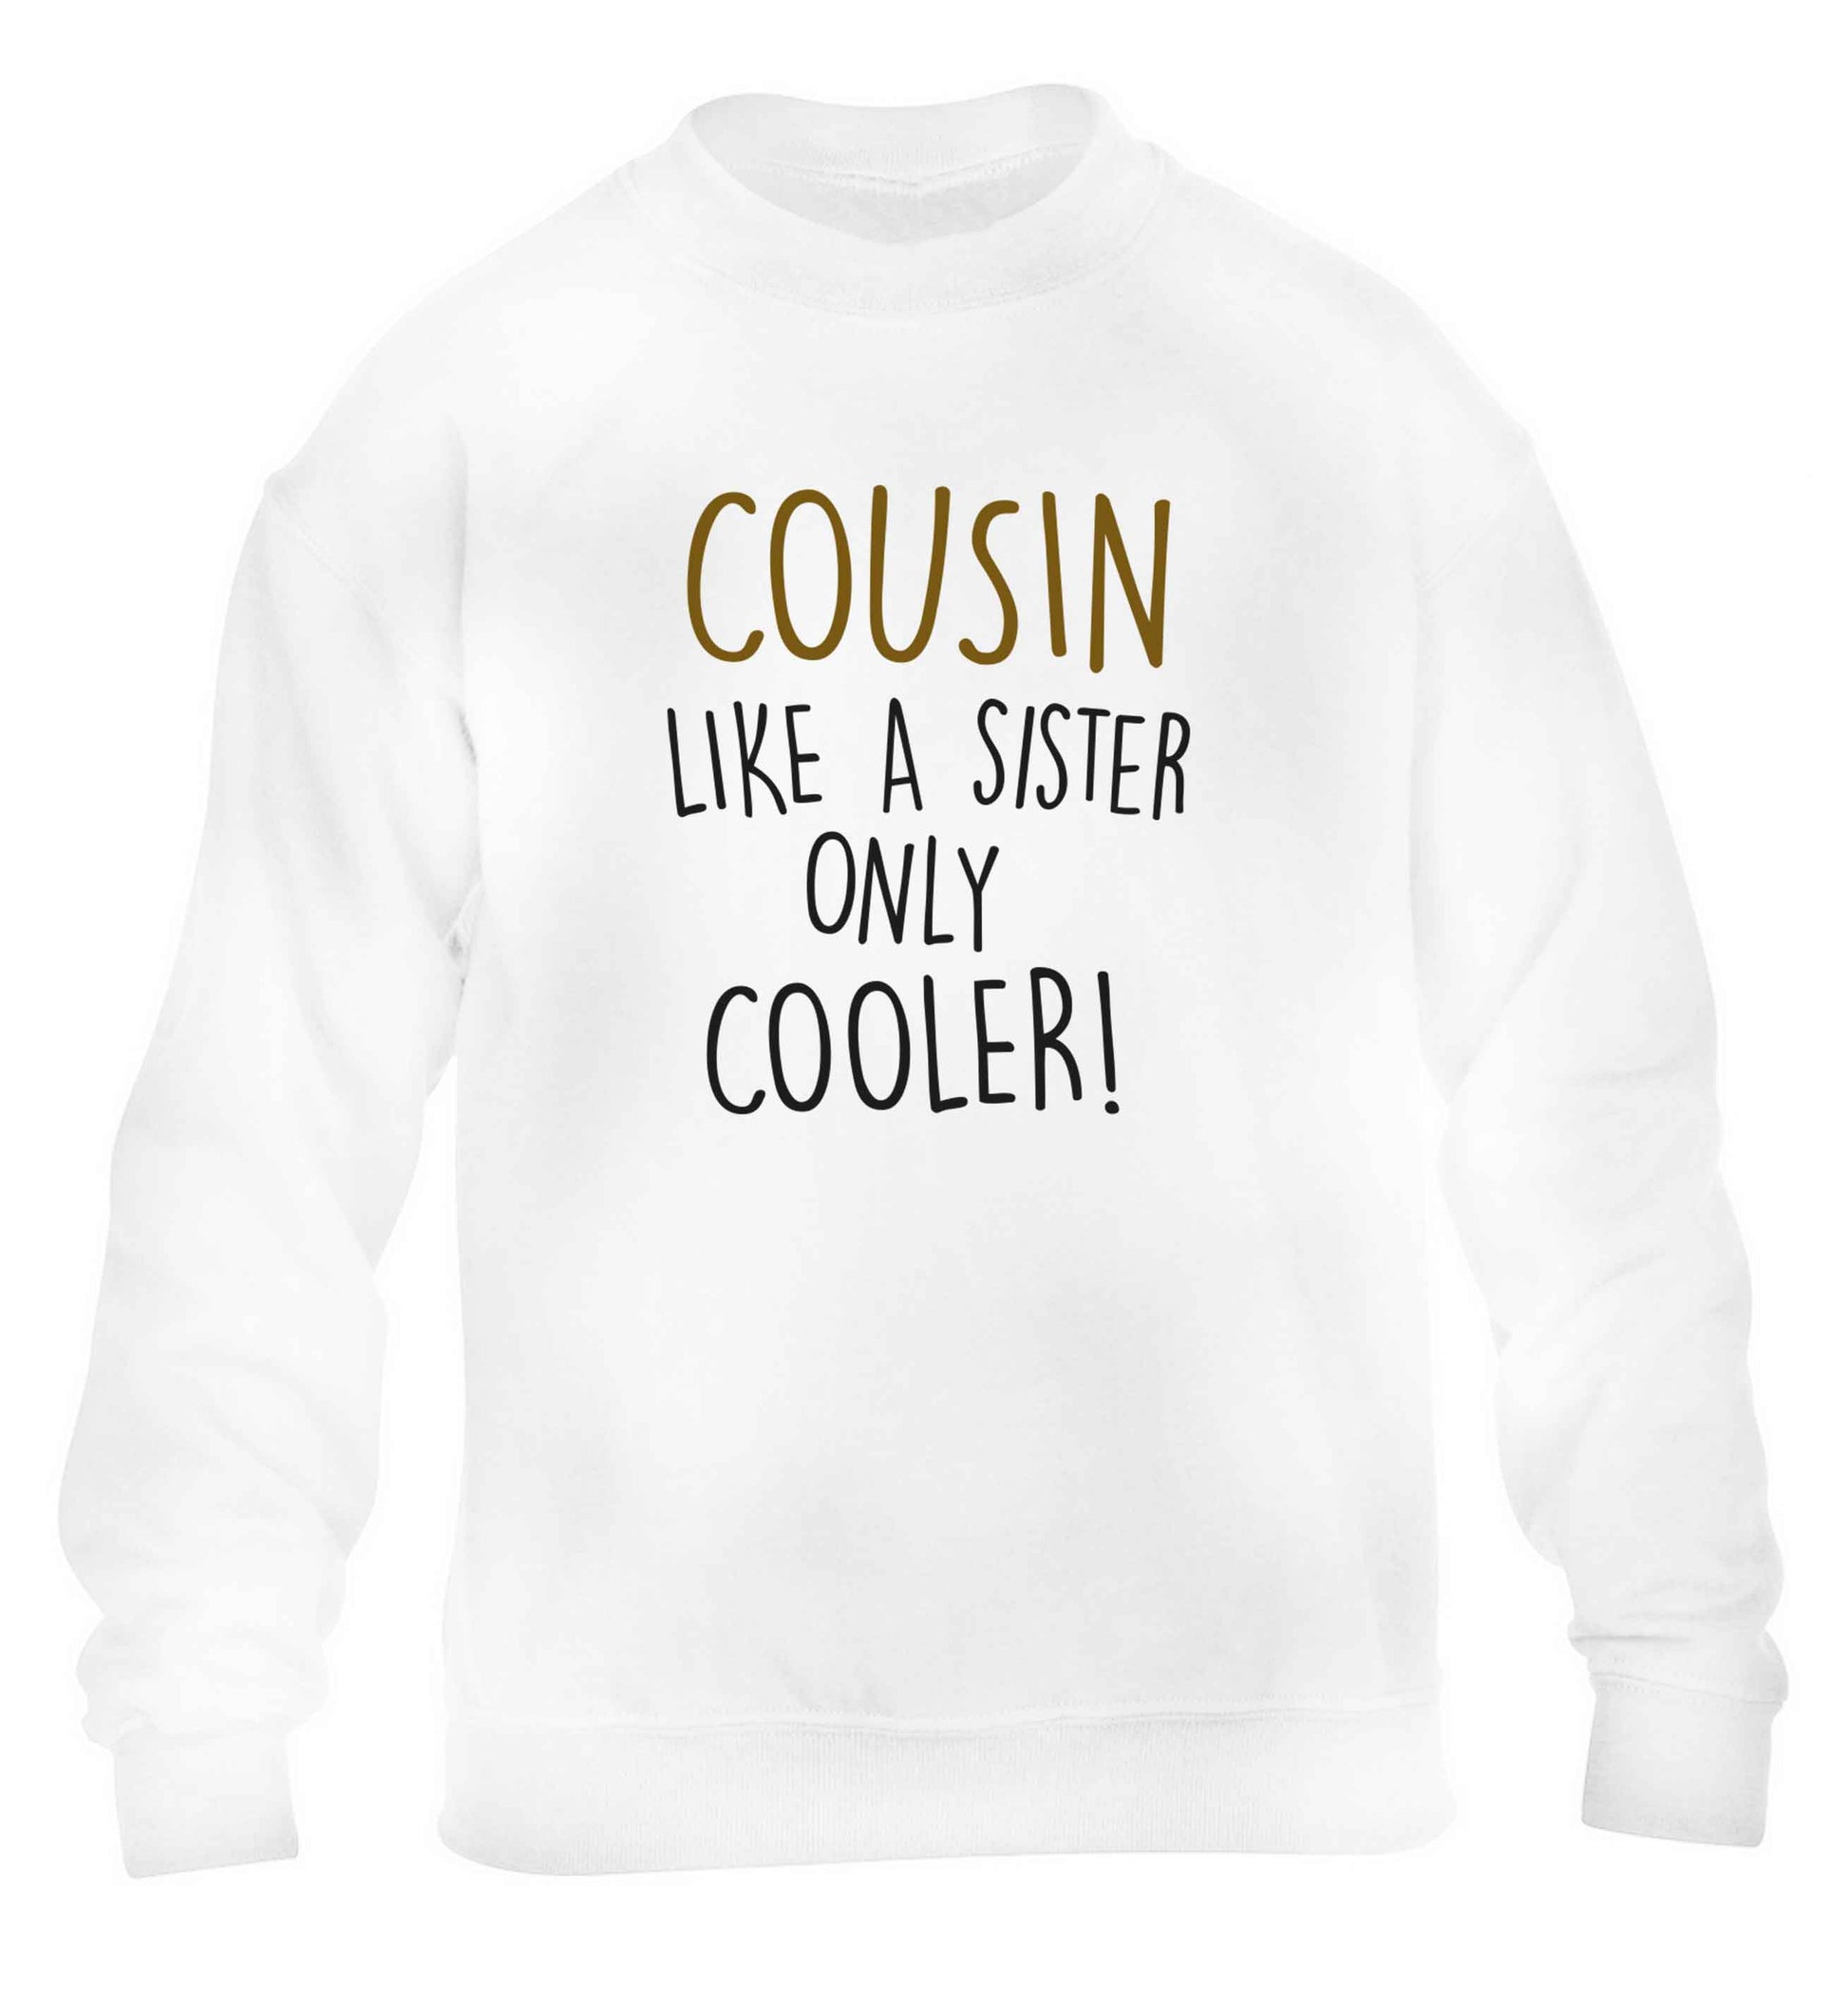 Cousin like a sister only cooler children's white sweater 12-13 Years